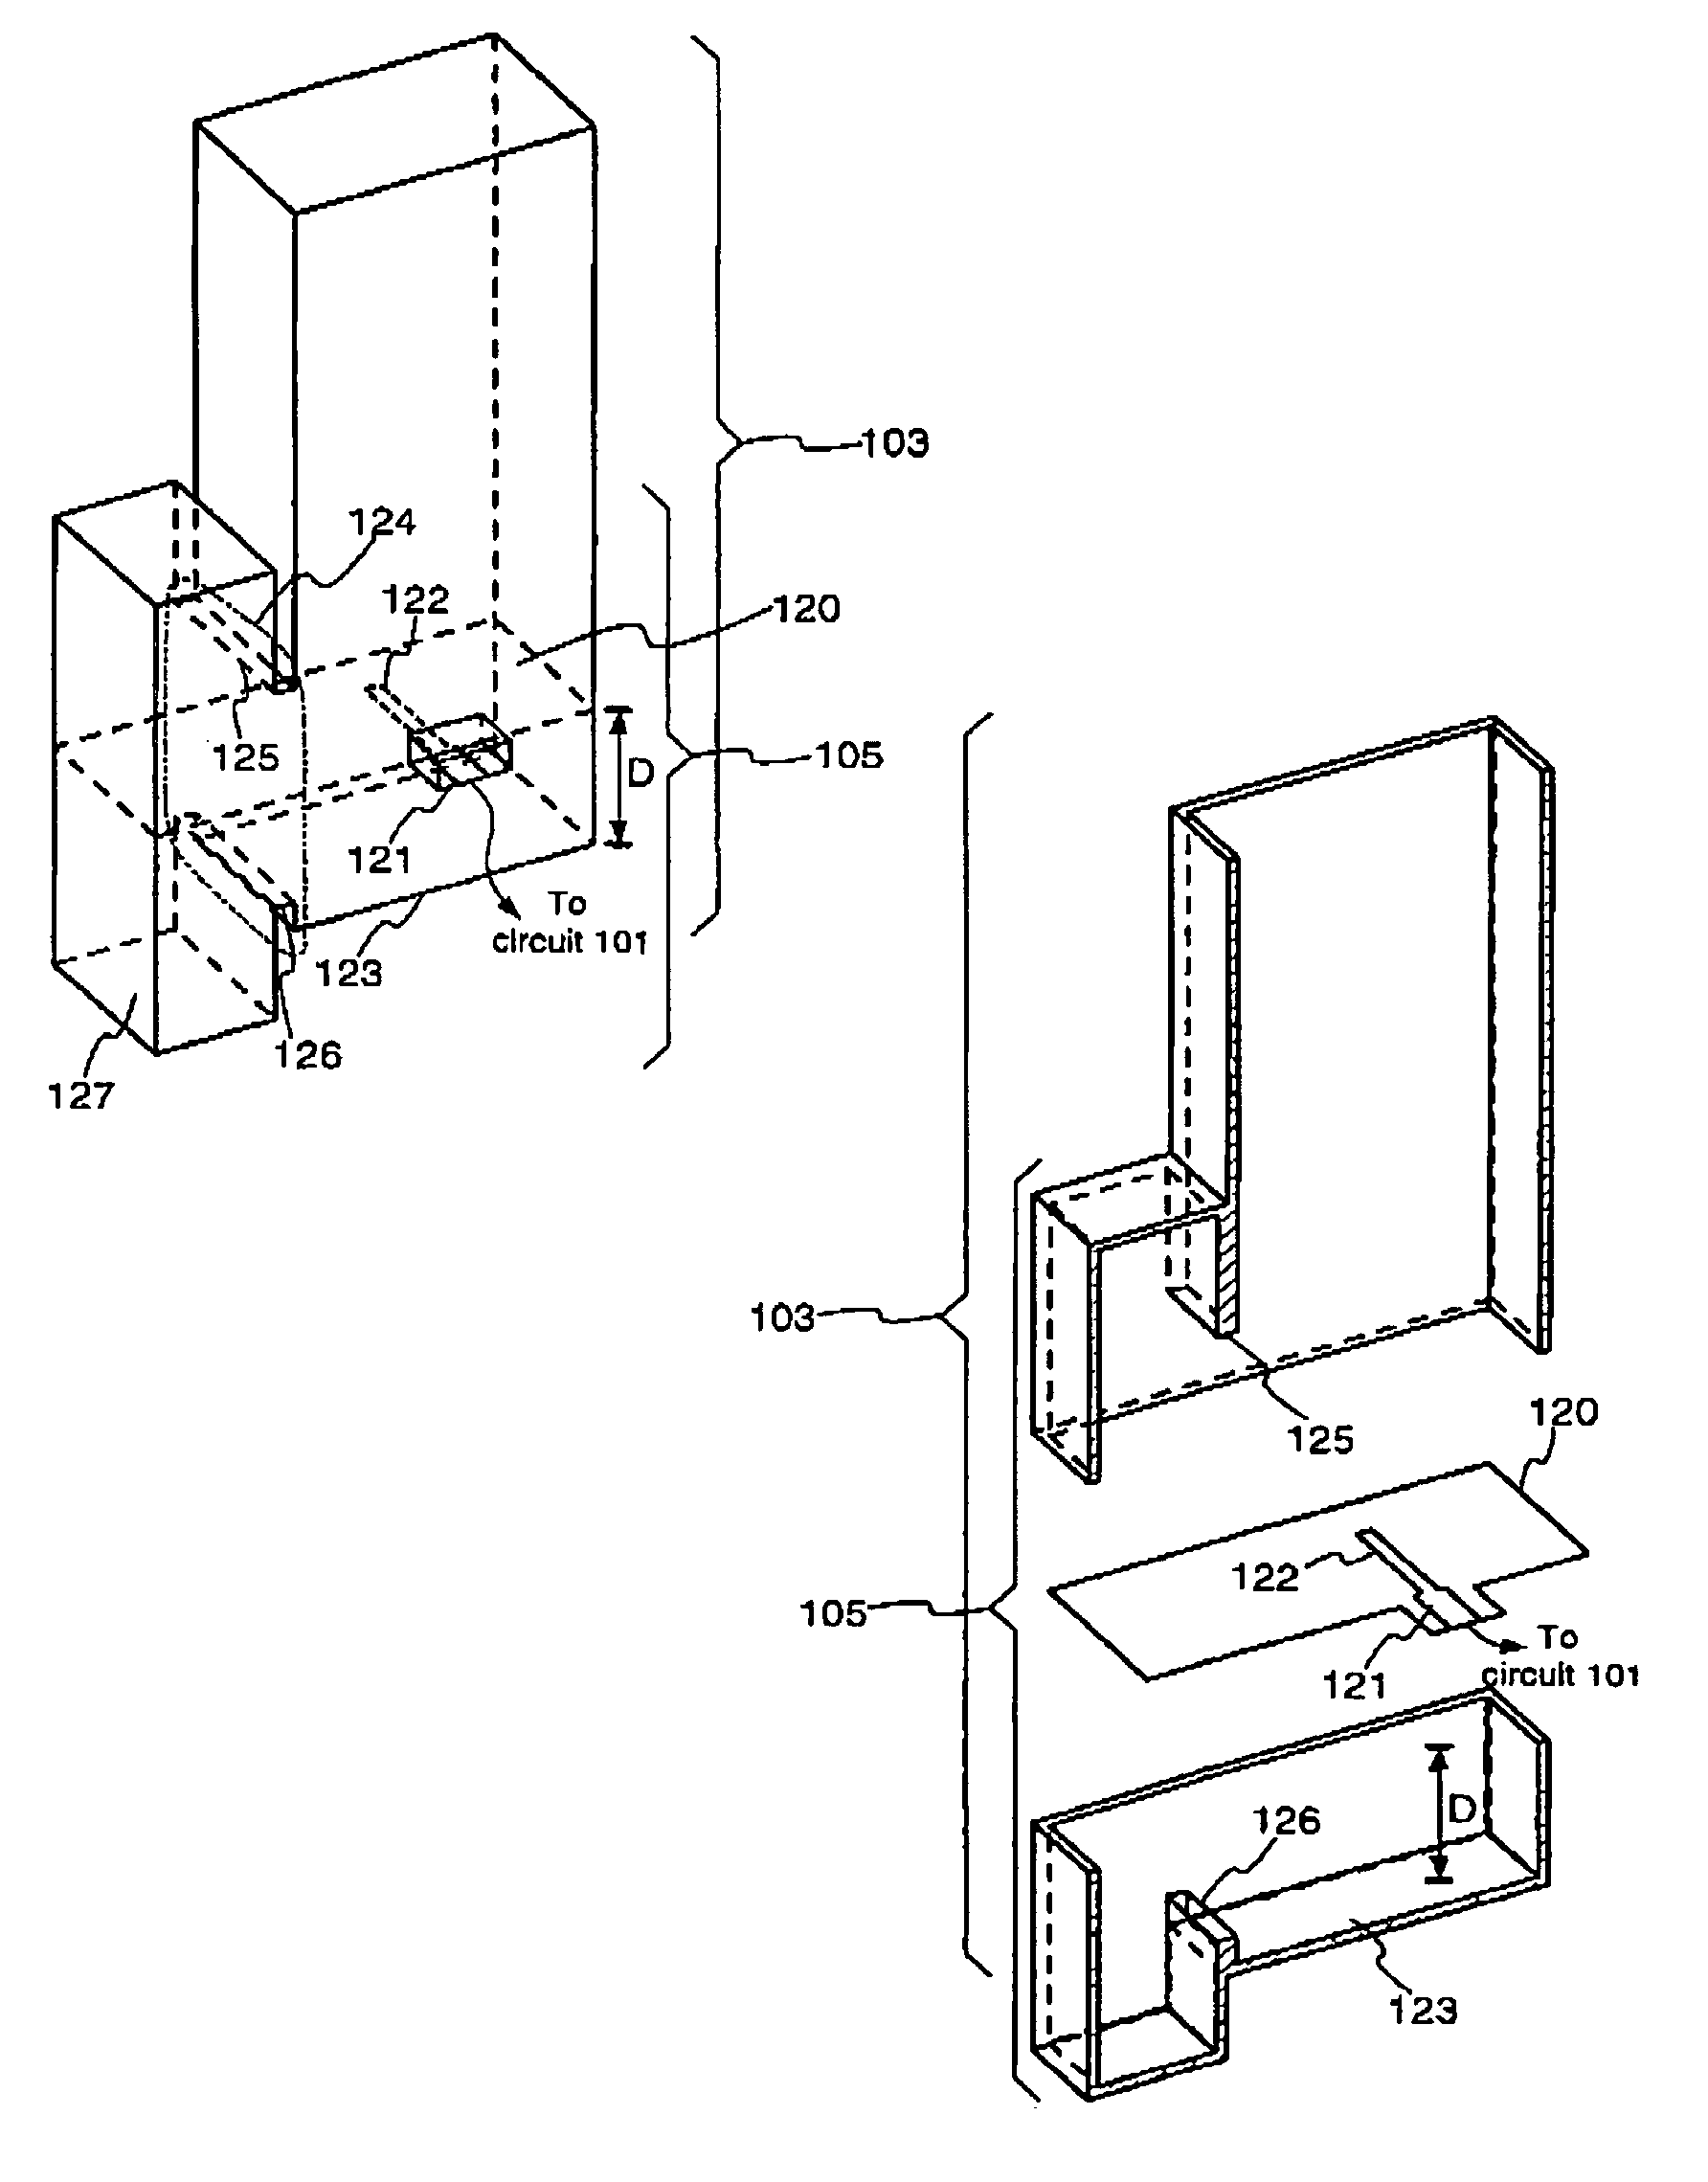 Transition between a microstrip circuit and a waveguide including a band stop filter and outside transmission reception unit incorporating the transition